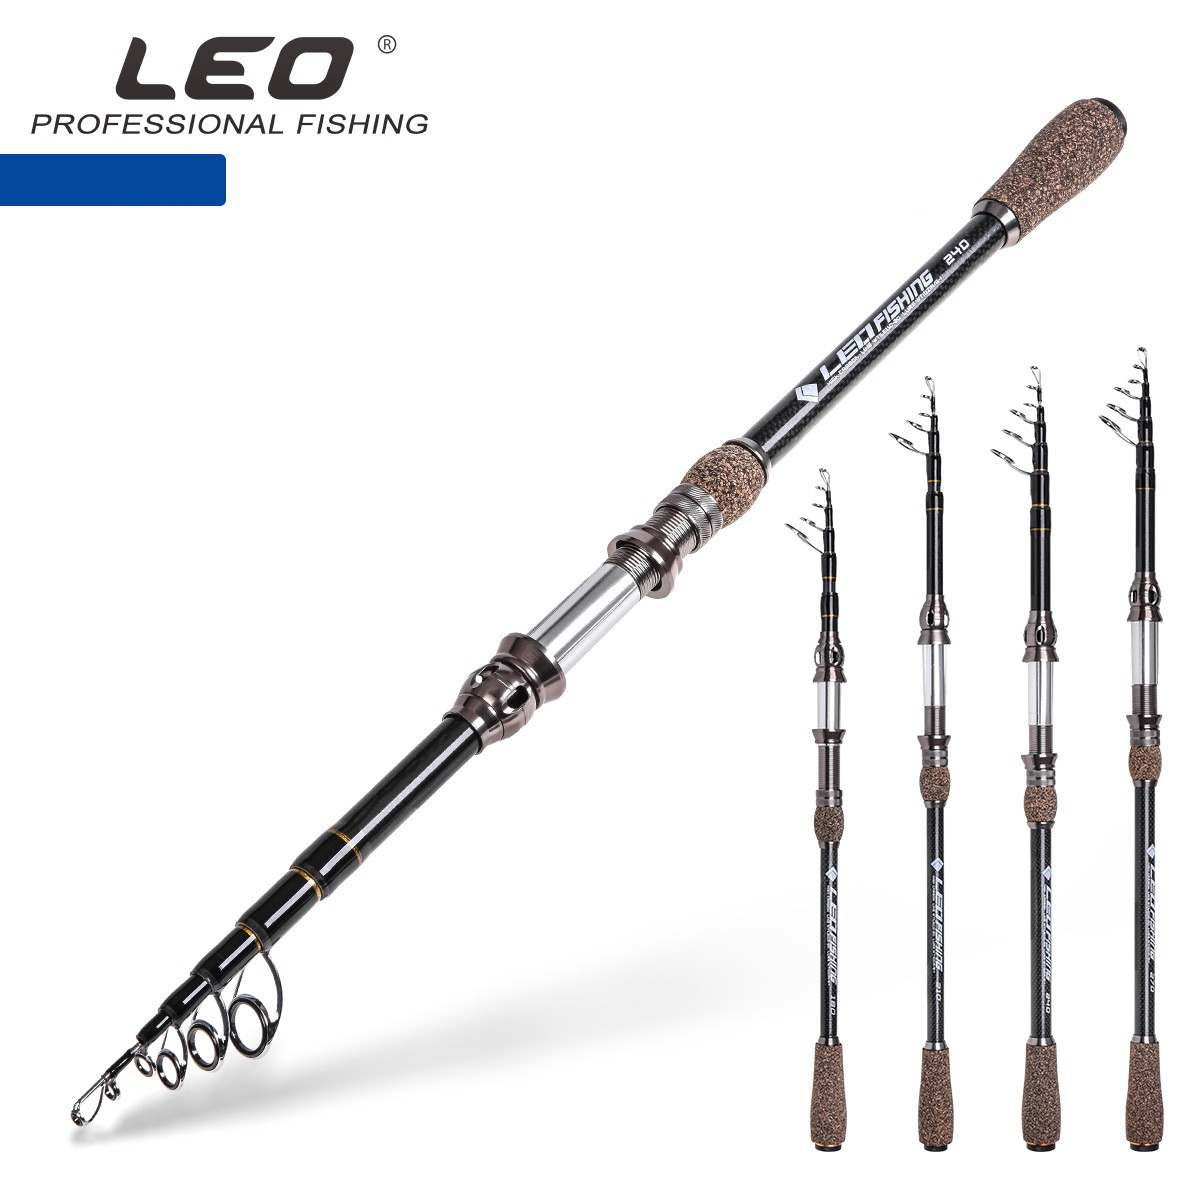 27974 Telescoping Fishing Rods Portable Travel Fishing Pole Carbon Fiber Ultra Light for Trout, Bass,Freshwater Saltwater